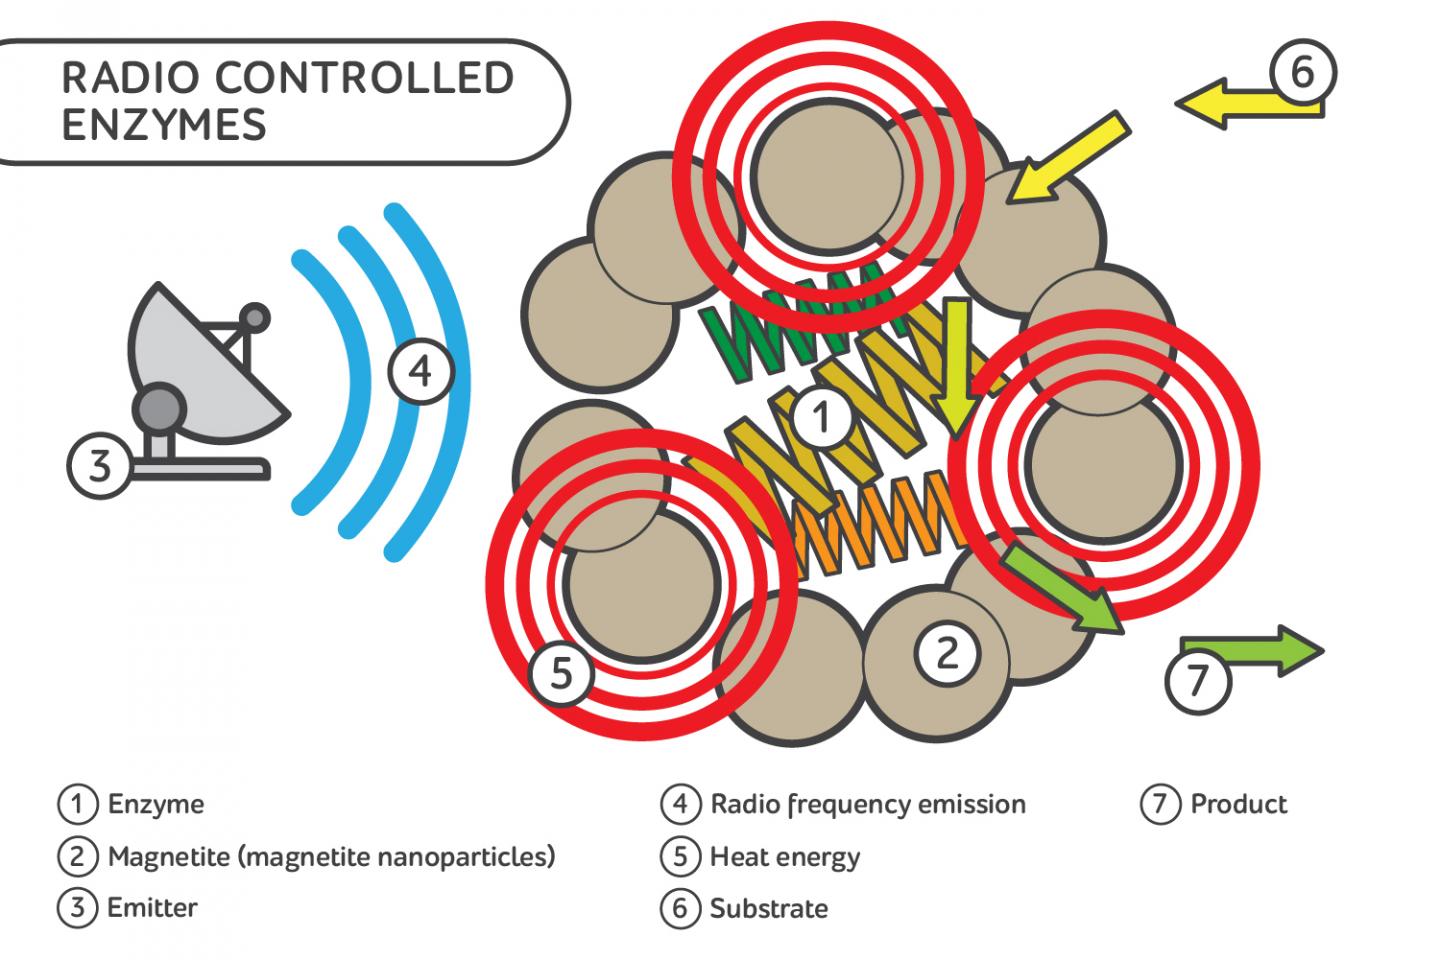 Radio-Controlled Enzymes